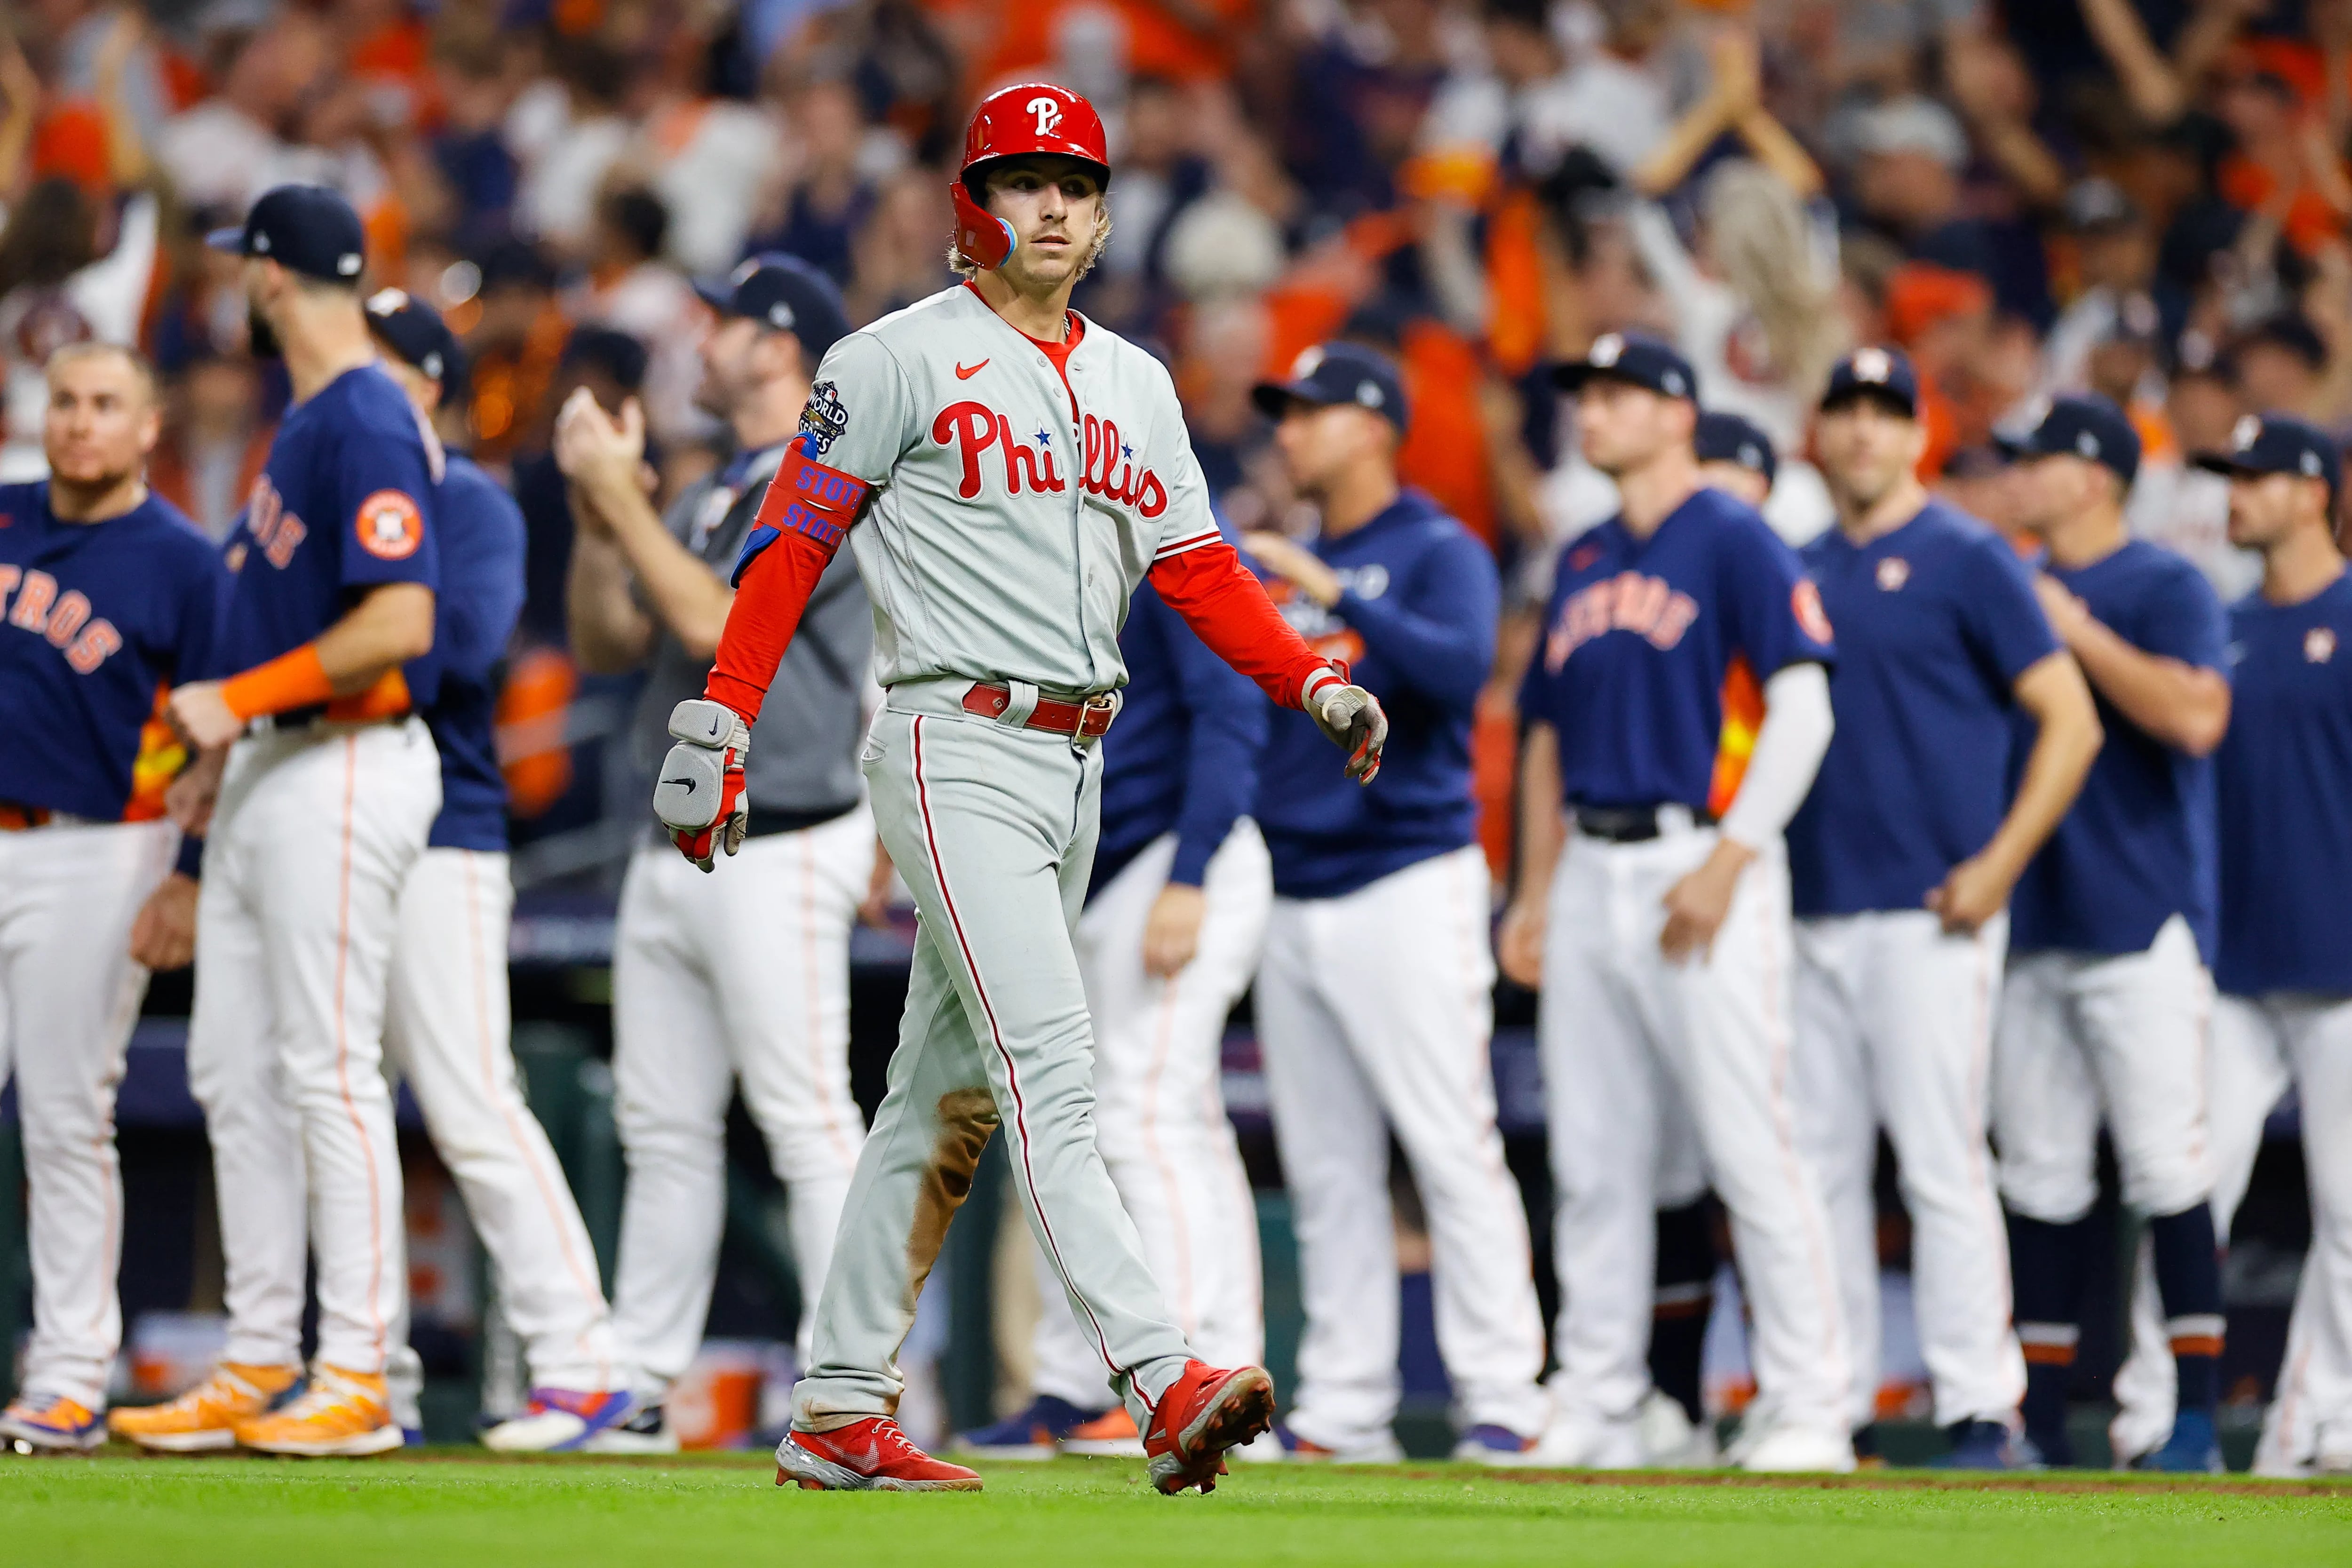 Photos: Phillies lose World Series Game 2 in Houston, 5-2